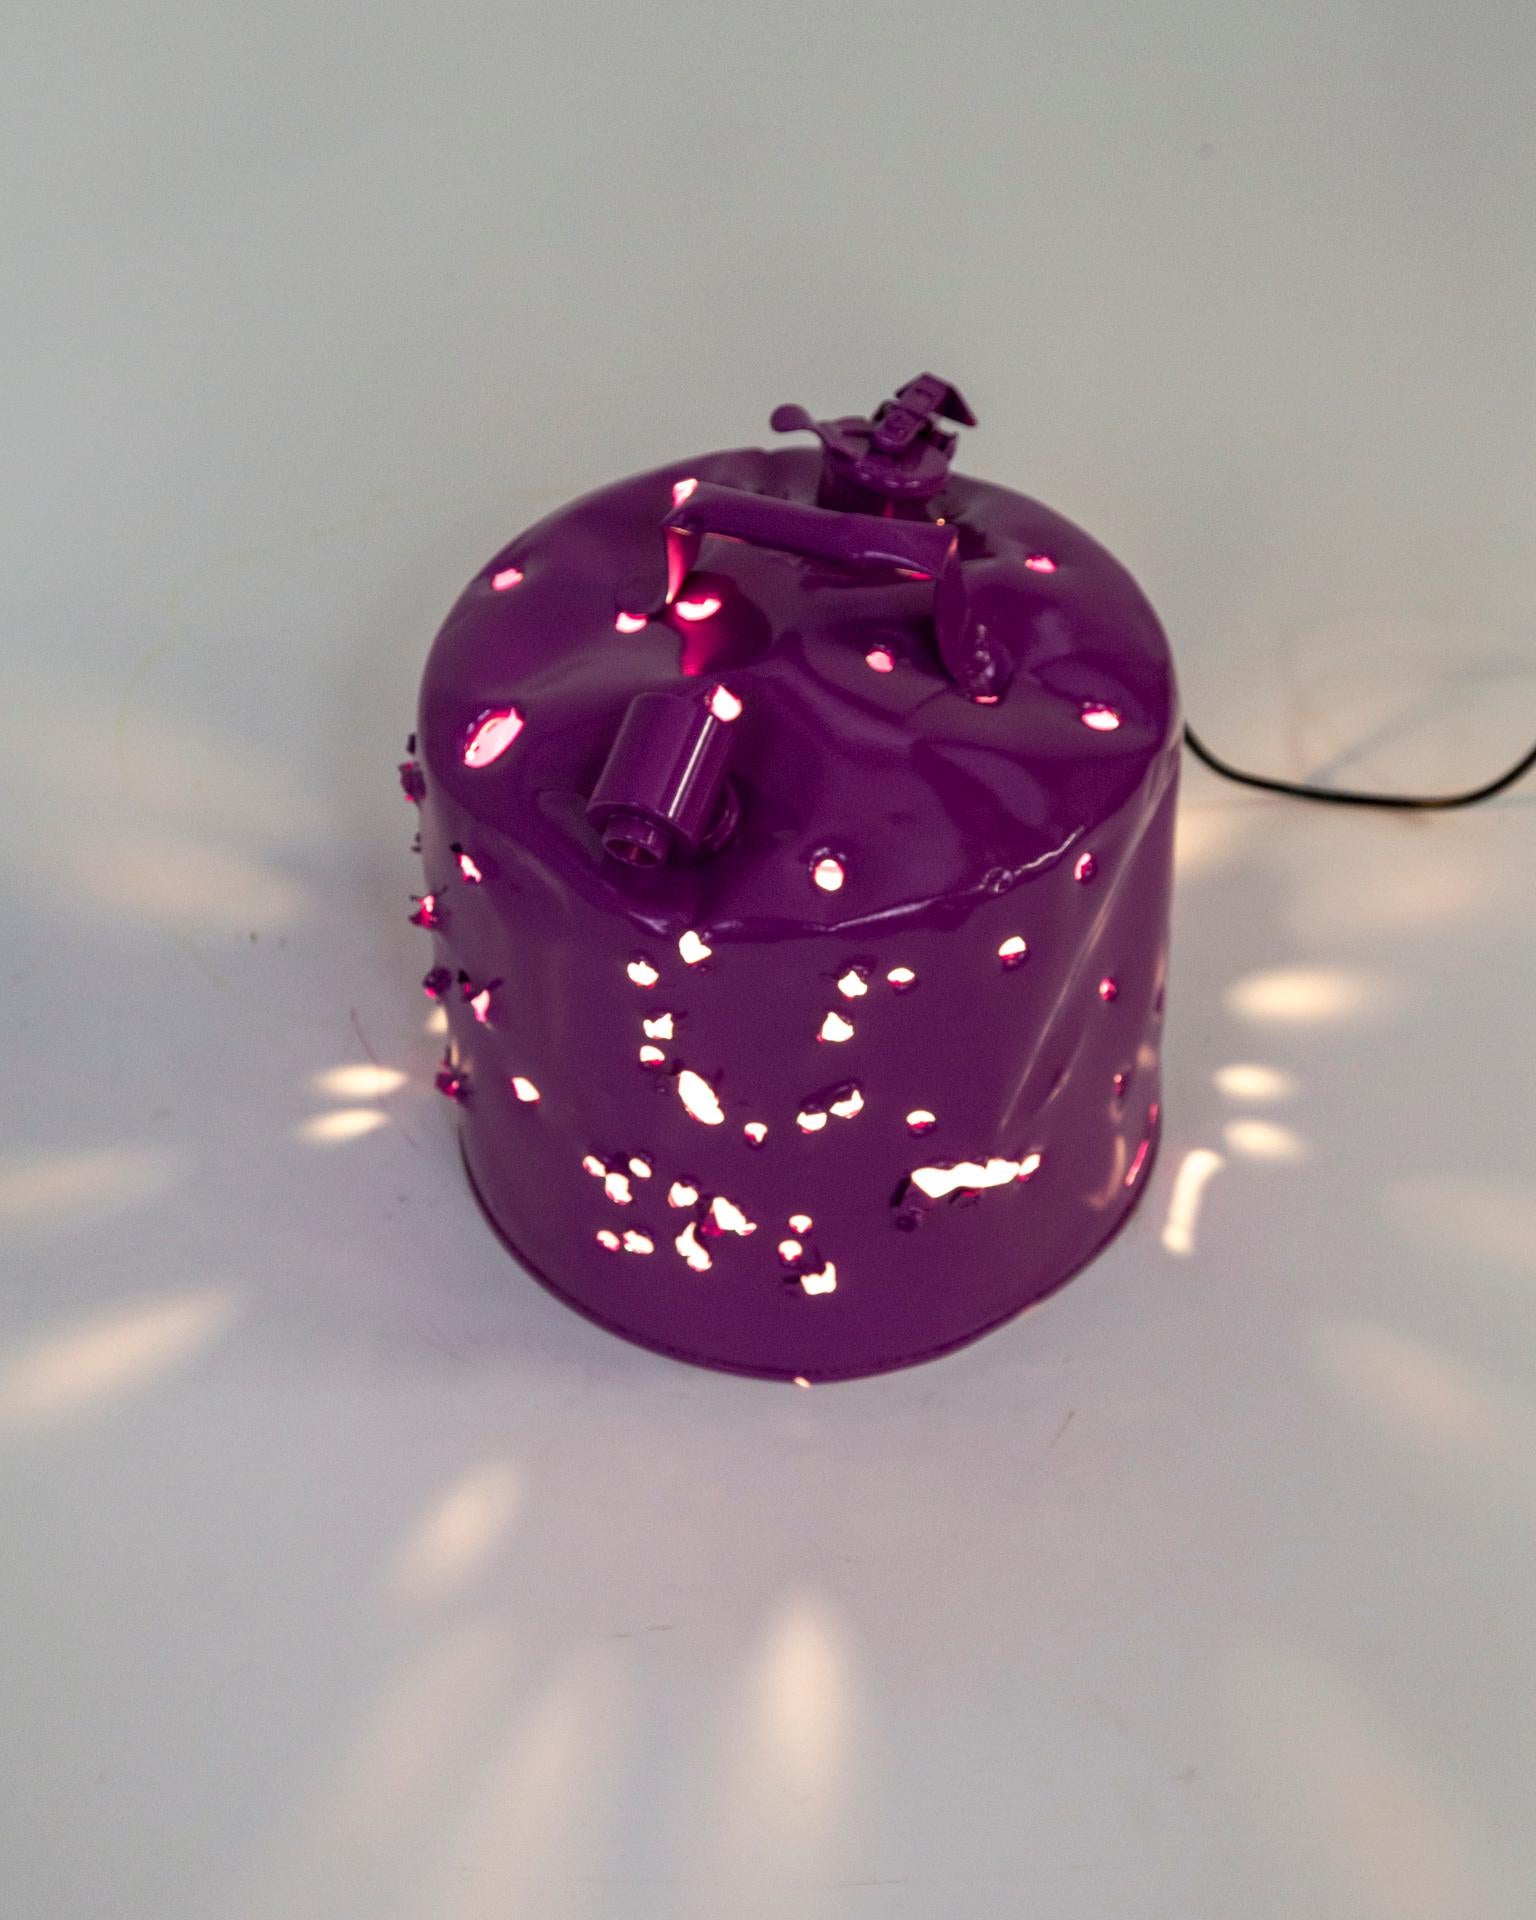 Powder-Coated Fuchsia Purple Bullet Hole Gas Can Lamp by Charles Linder